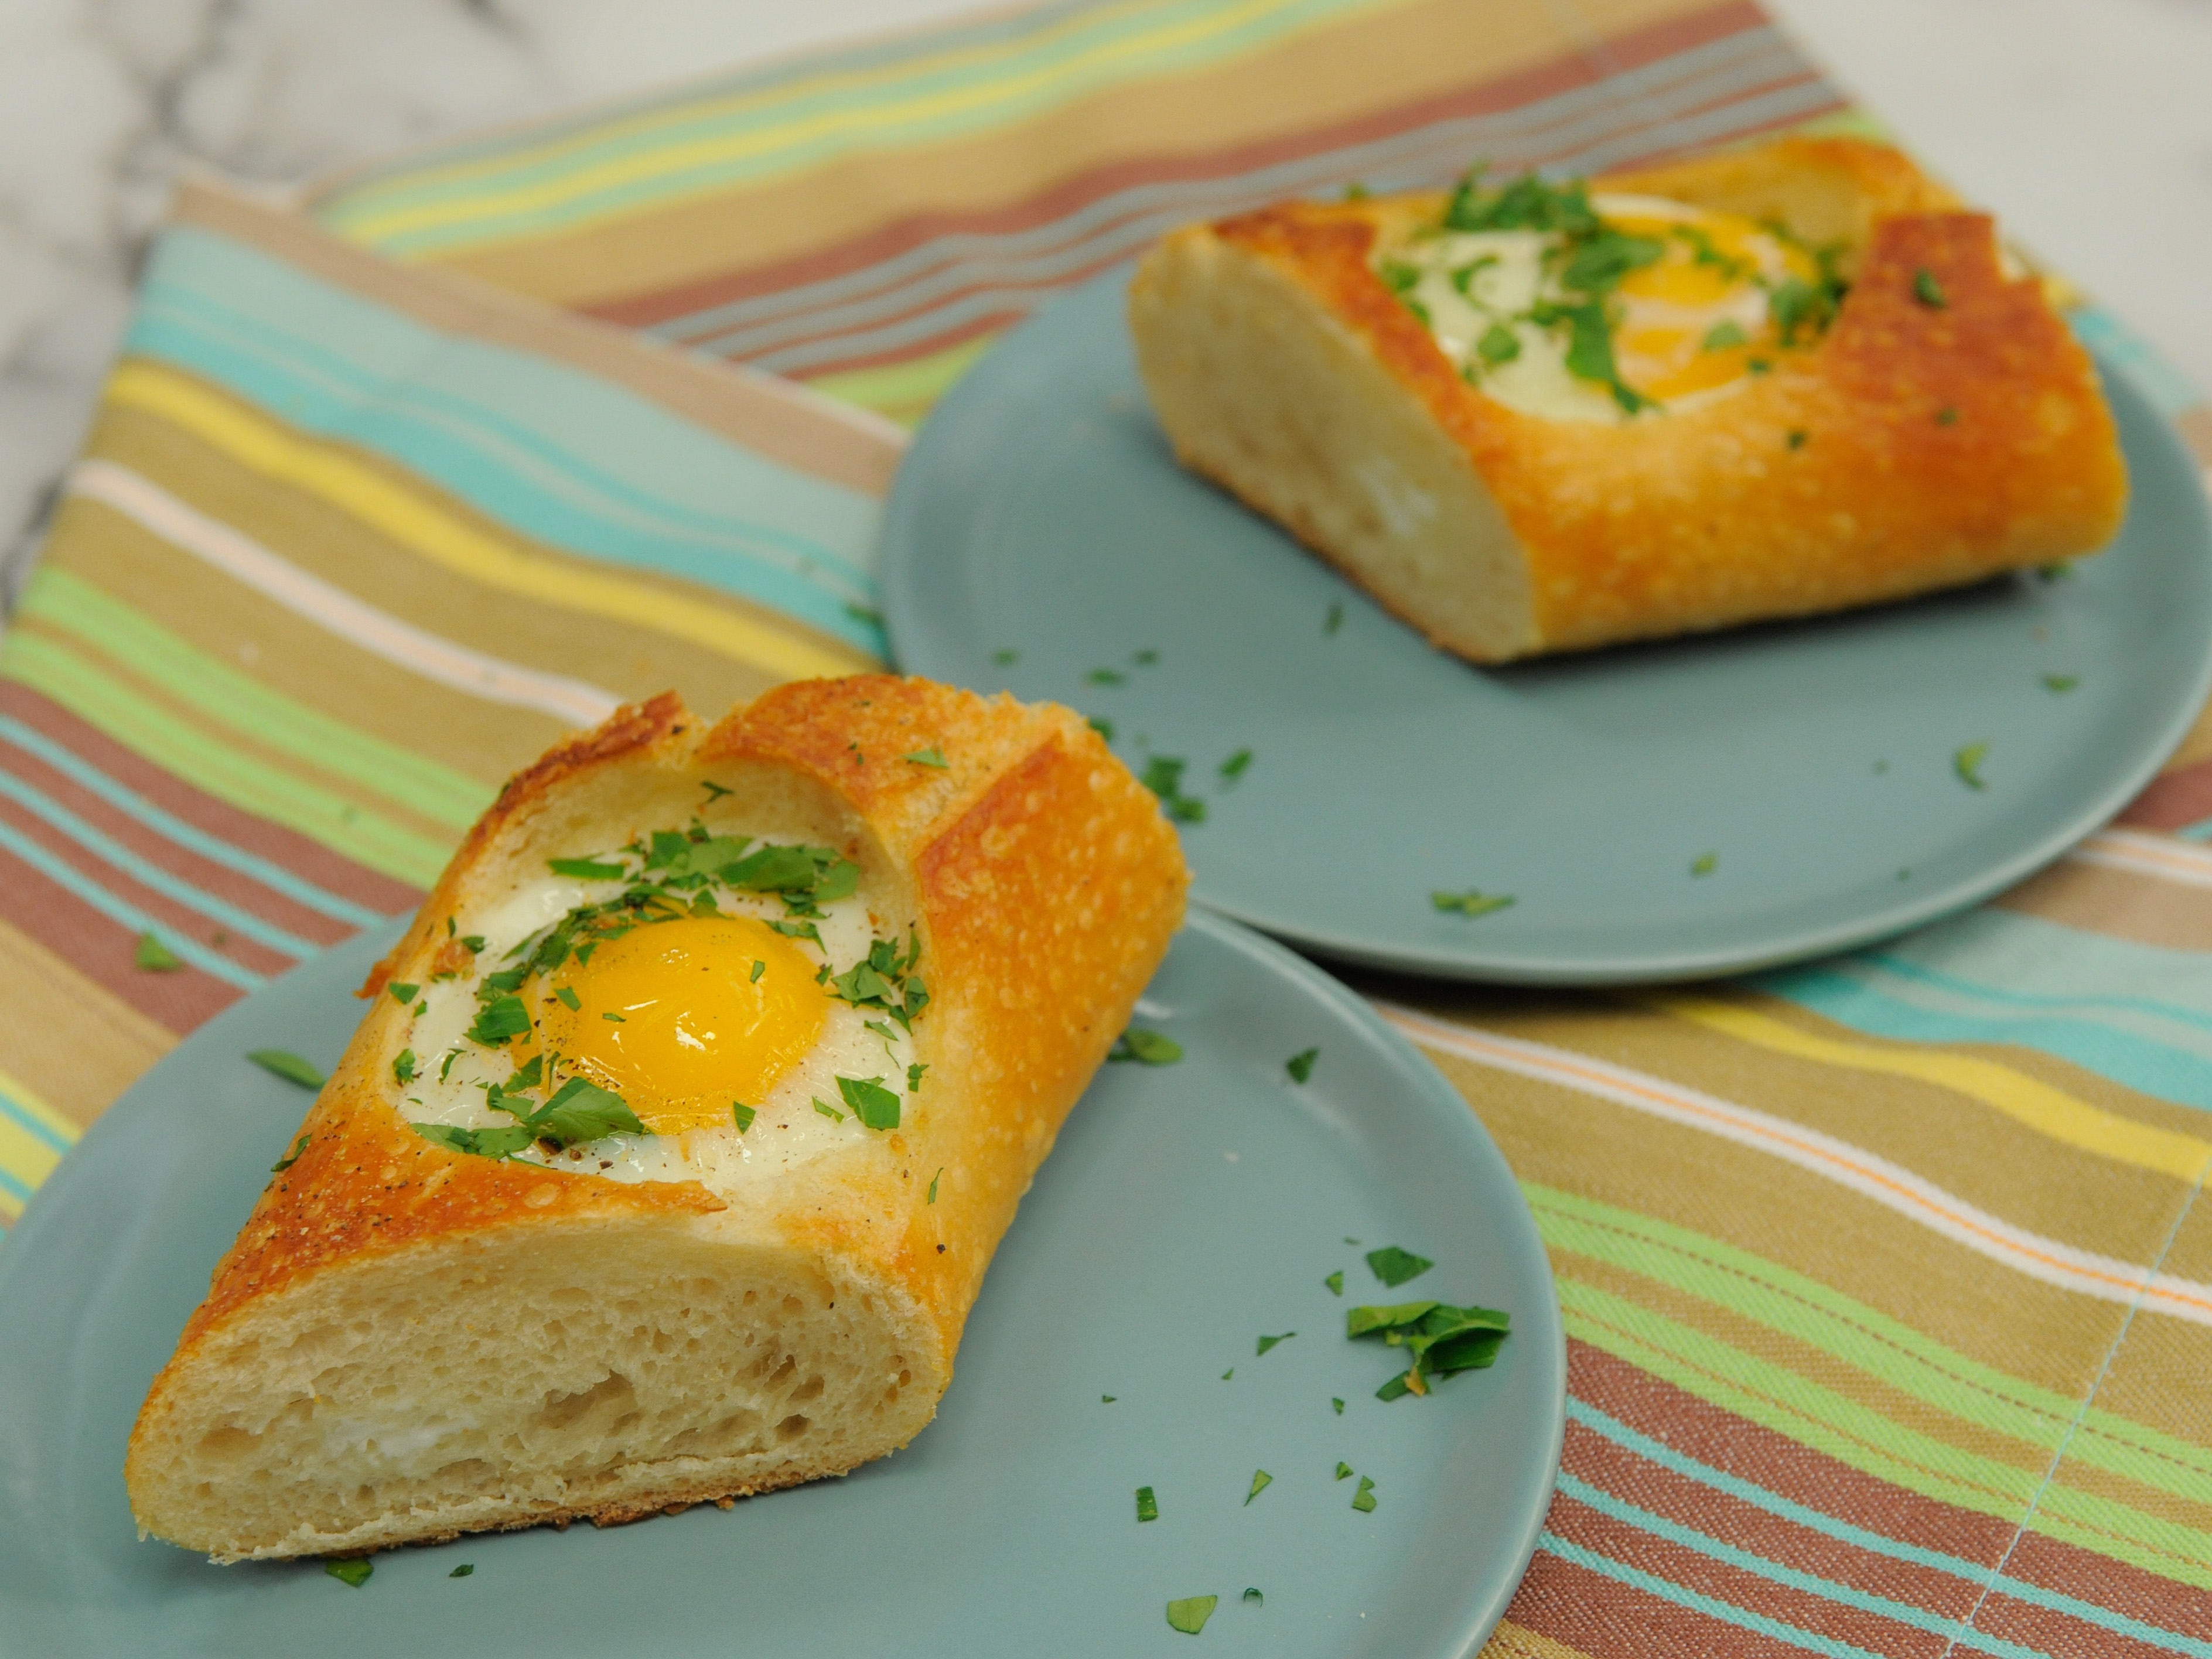 https://www.foodnetwork.com/content/dam/images/food/fullset/2015/2/10/0/KC0502H_Whole-Loaf-Toad-in-the-Hole_s4x3.jpg